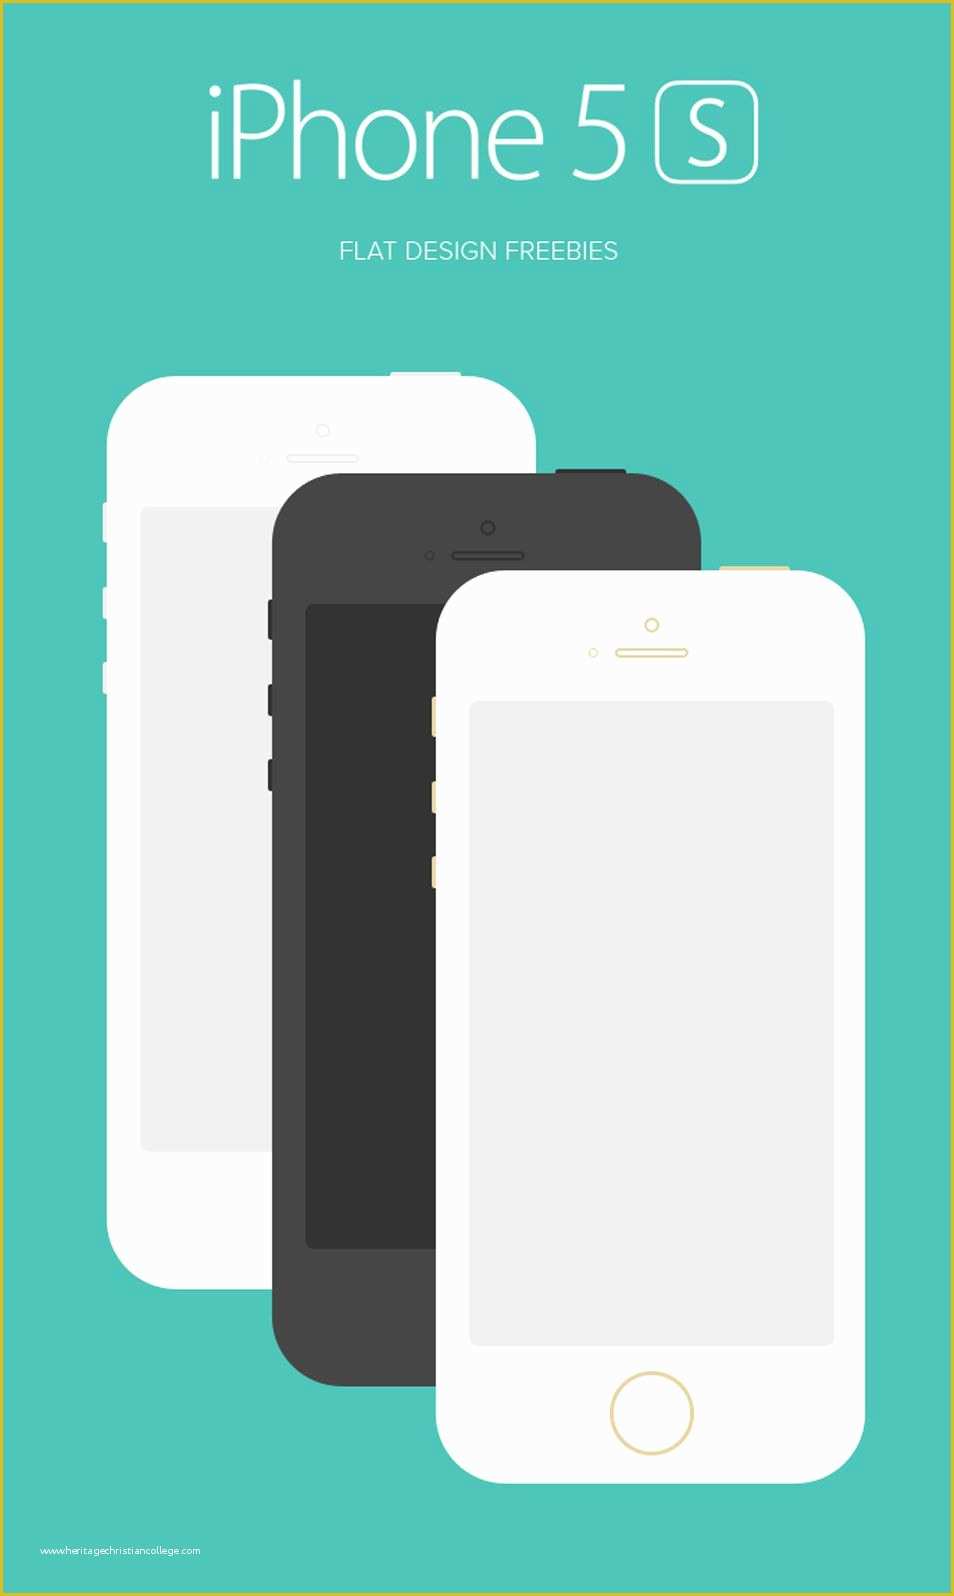 iPhone Psd Template Free Download Of 250 Free High Resolution Psd Mockup Design Templates